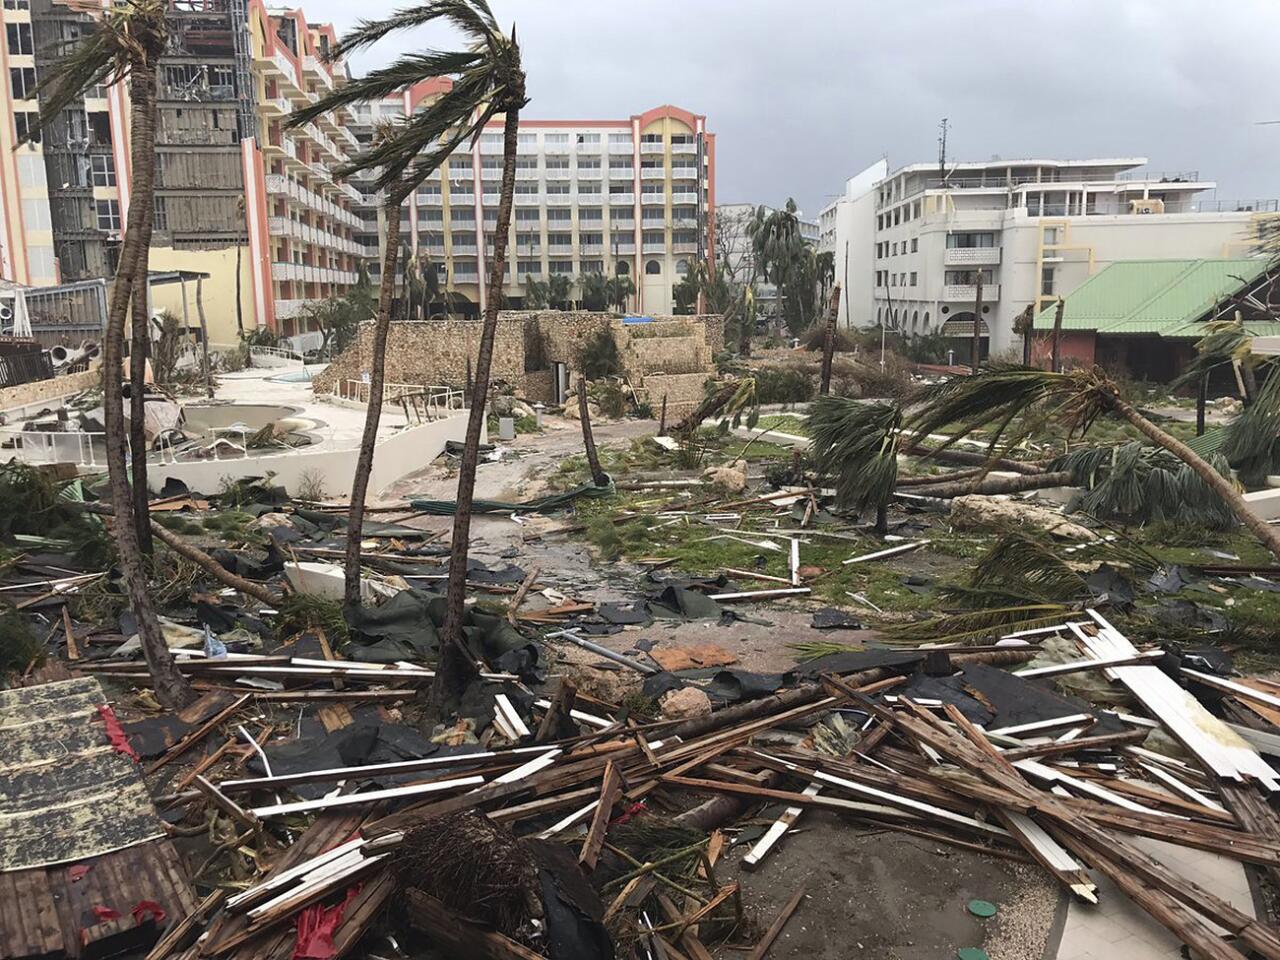 Storm damage in the aftermath of Hurricane Irma on Saint Martin on Sept. 6, 2017.